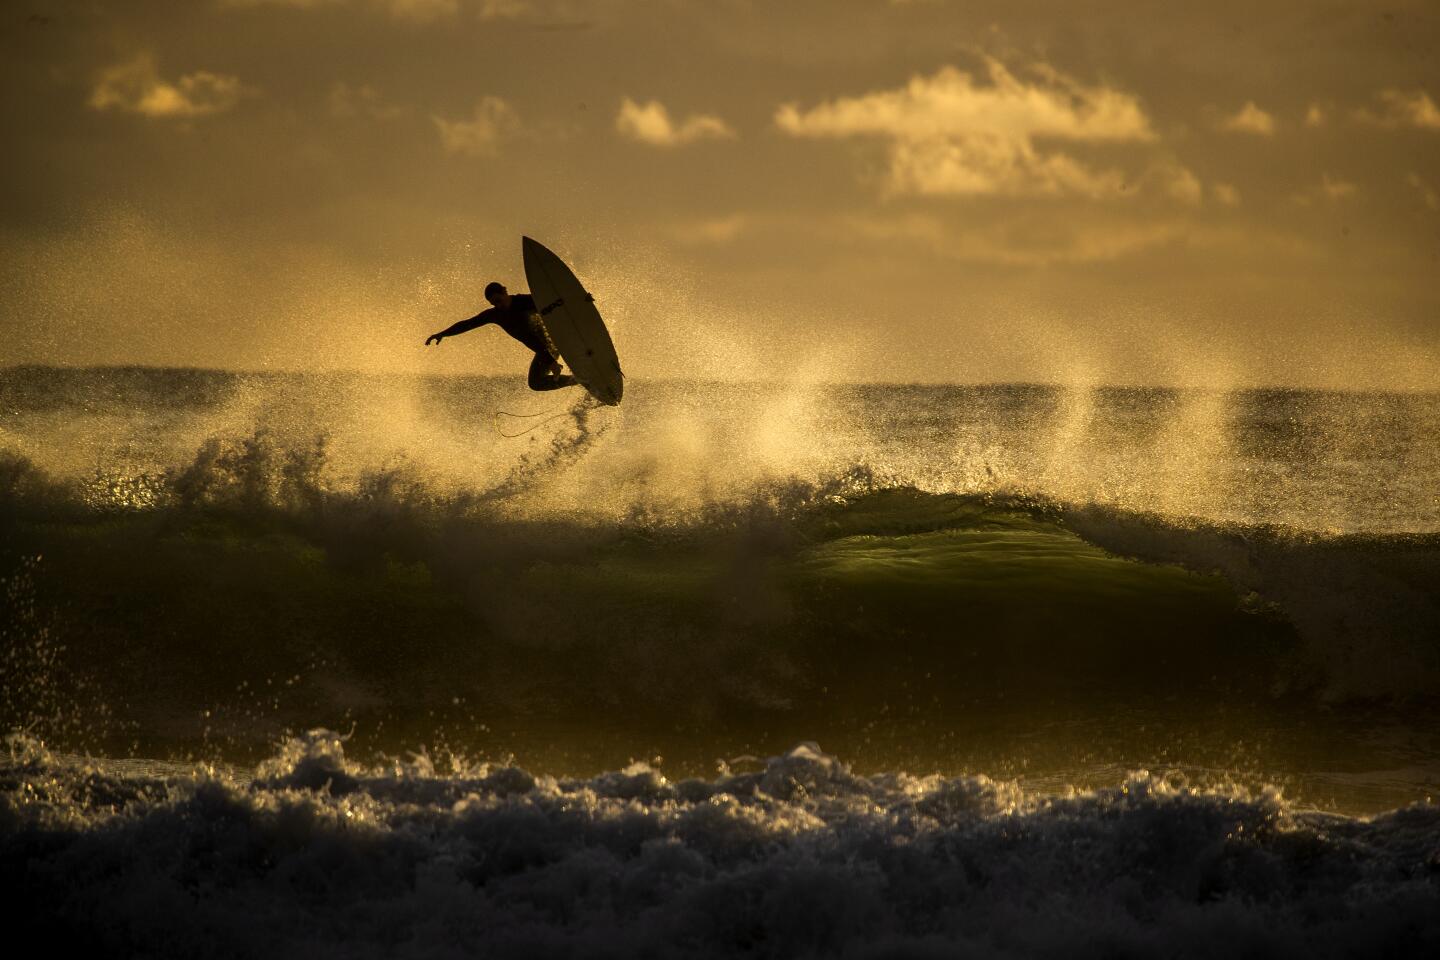 A surfer is silhouetted by the sunset as he is airborne off a big wave in between rain showers in Newport Beach, Calif., on Nov. 20, 2019.